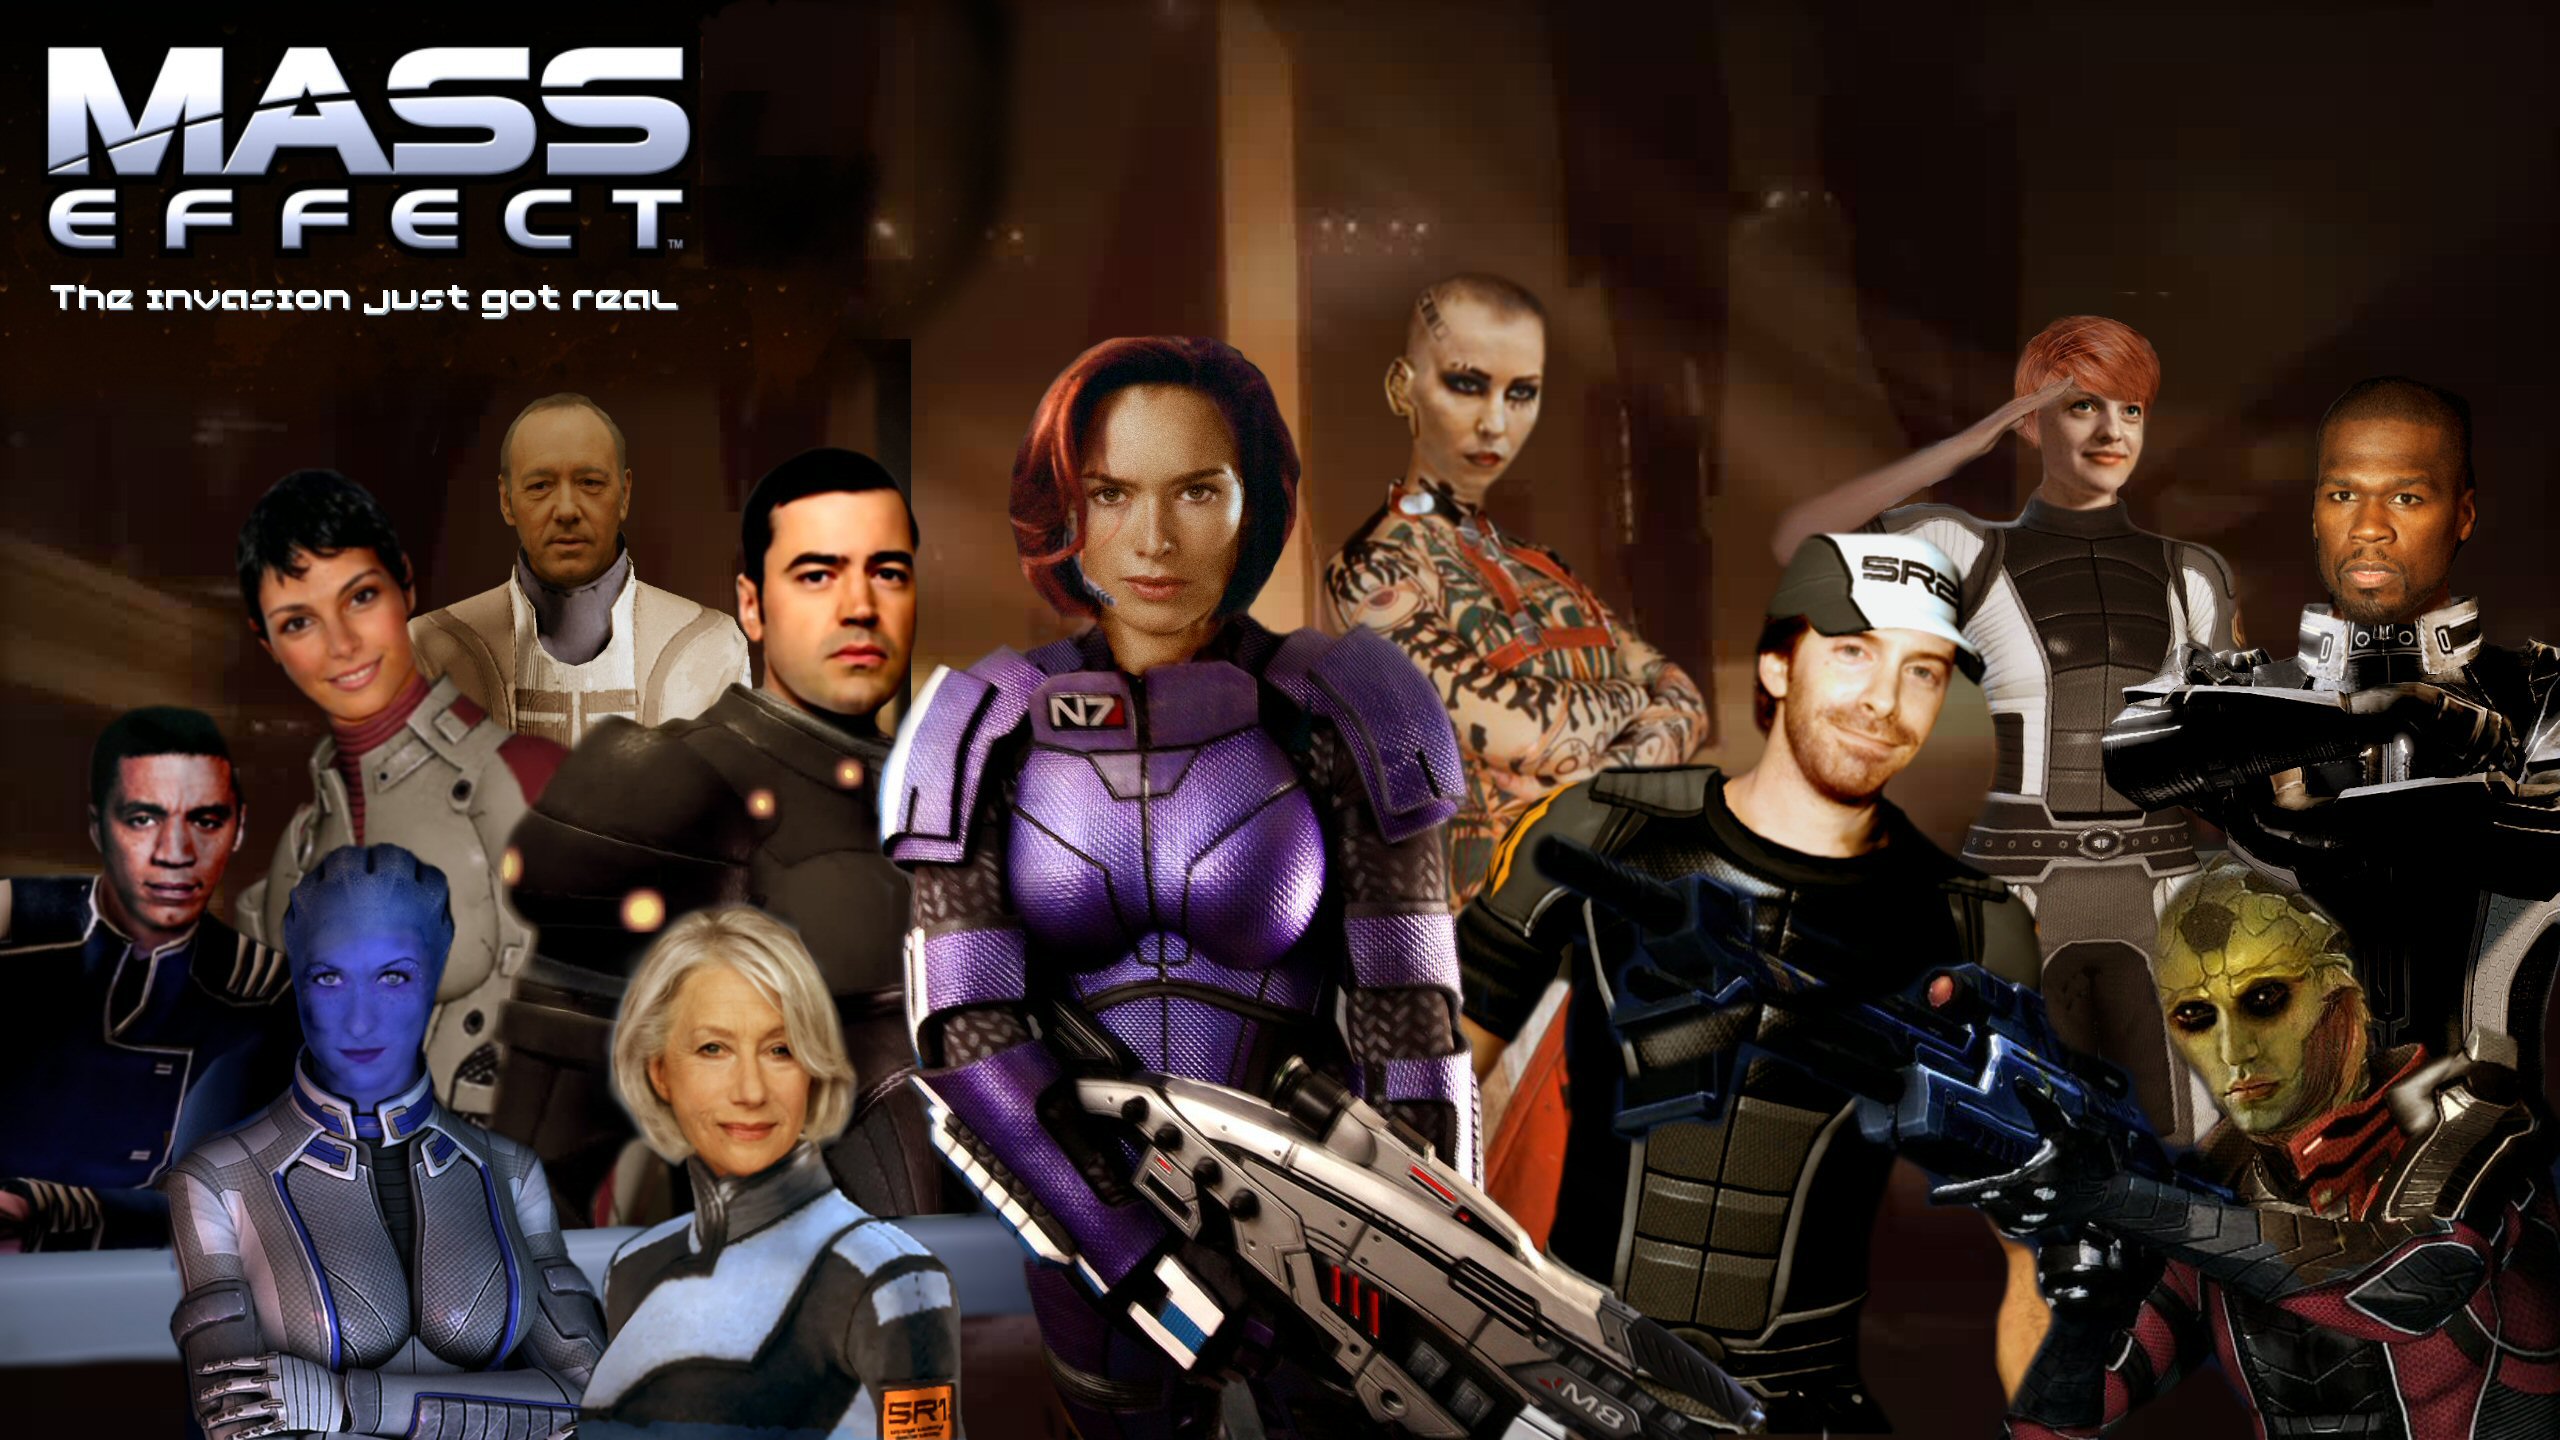 mass_effect_live_action_movie_by_minorshan-d3jv7wf.jpg